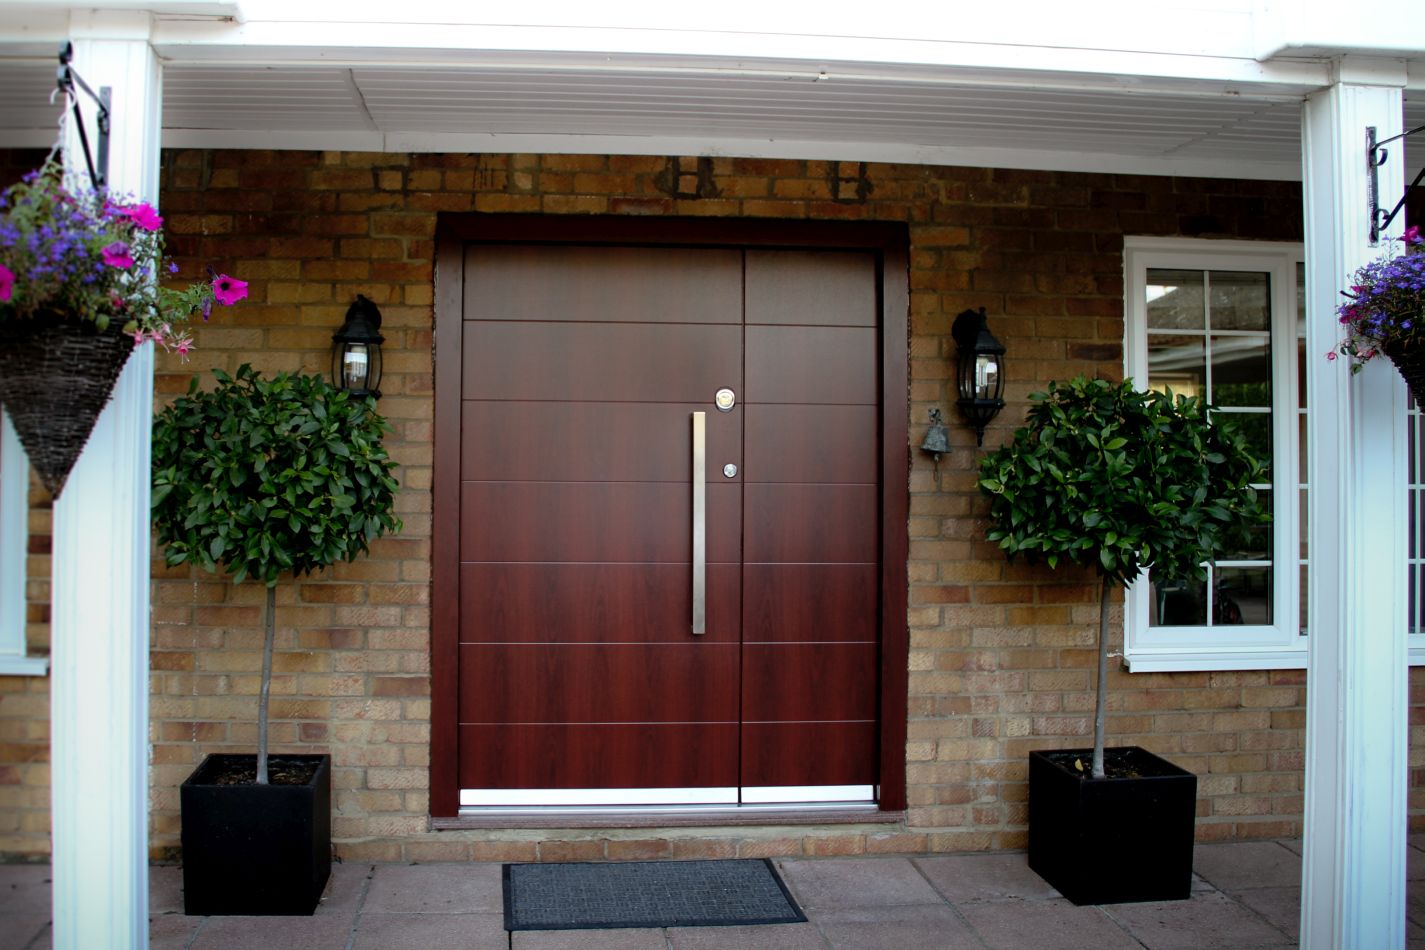 Why People Prefer To Install Security Doors In Their House?